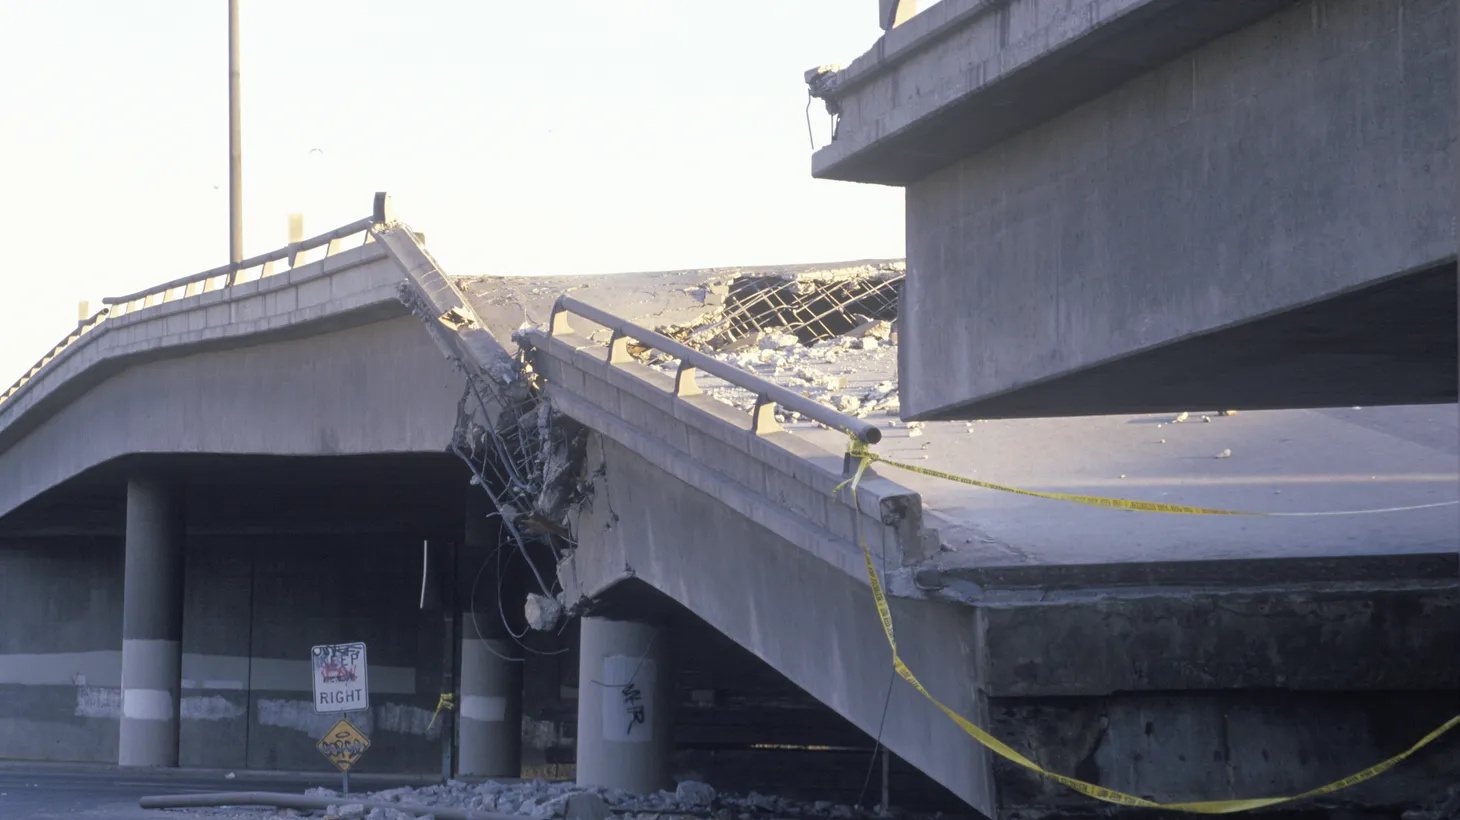 An overpass collapsed on Highway 10 in the Northridge/Reseda area at the epicenter of the 1994 Northridge earthquake.